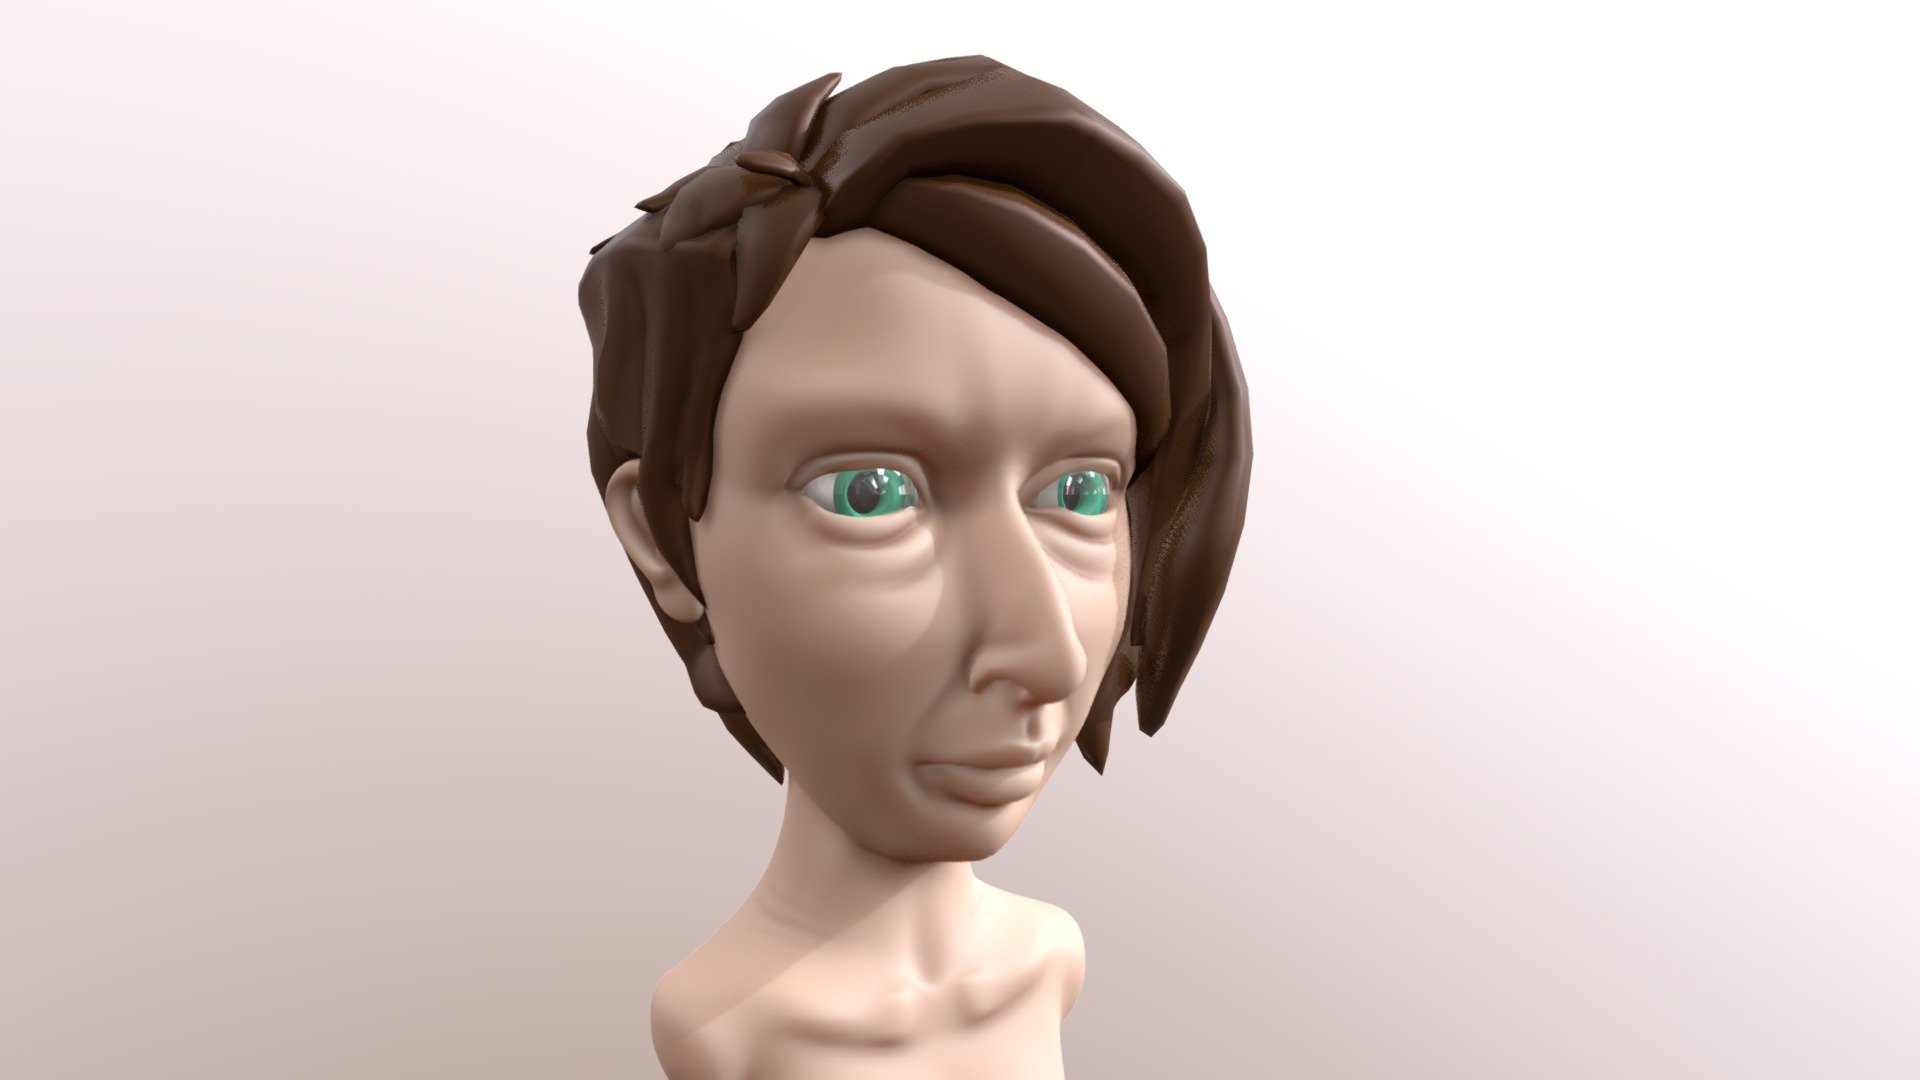 Hair style inspired by the hair in Fortnite. 
1.83 hrs into the sculpt. I still need to add some more detail, reshape a few things and add more details into the hair. Then I can texture the sucker 3d model